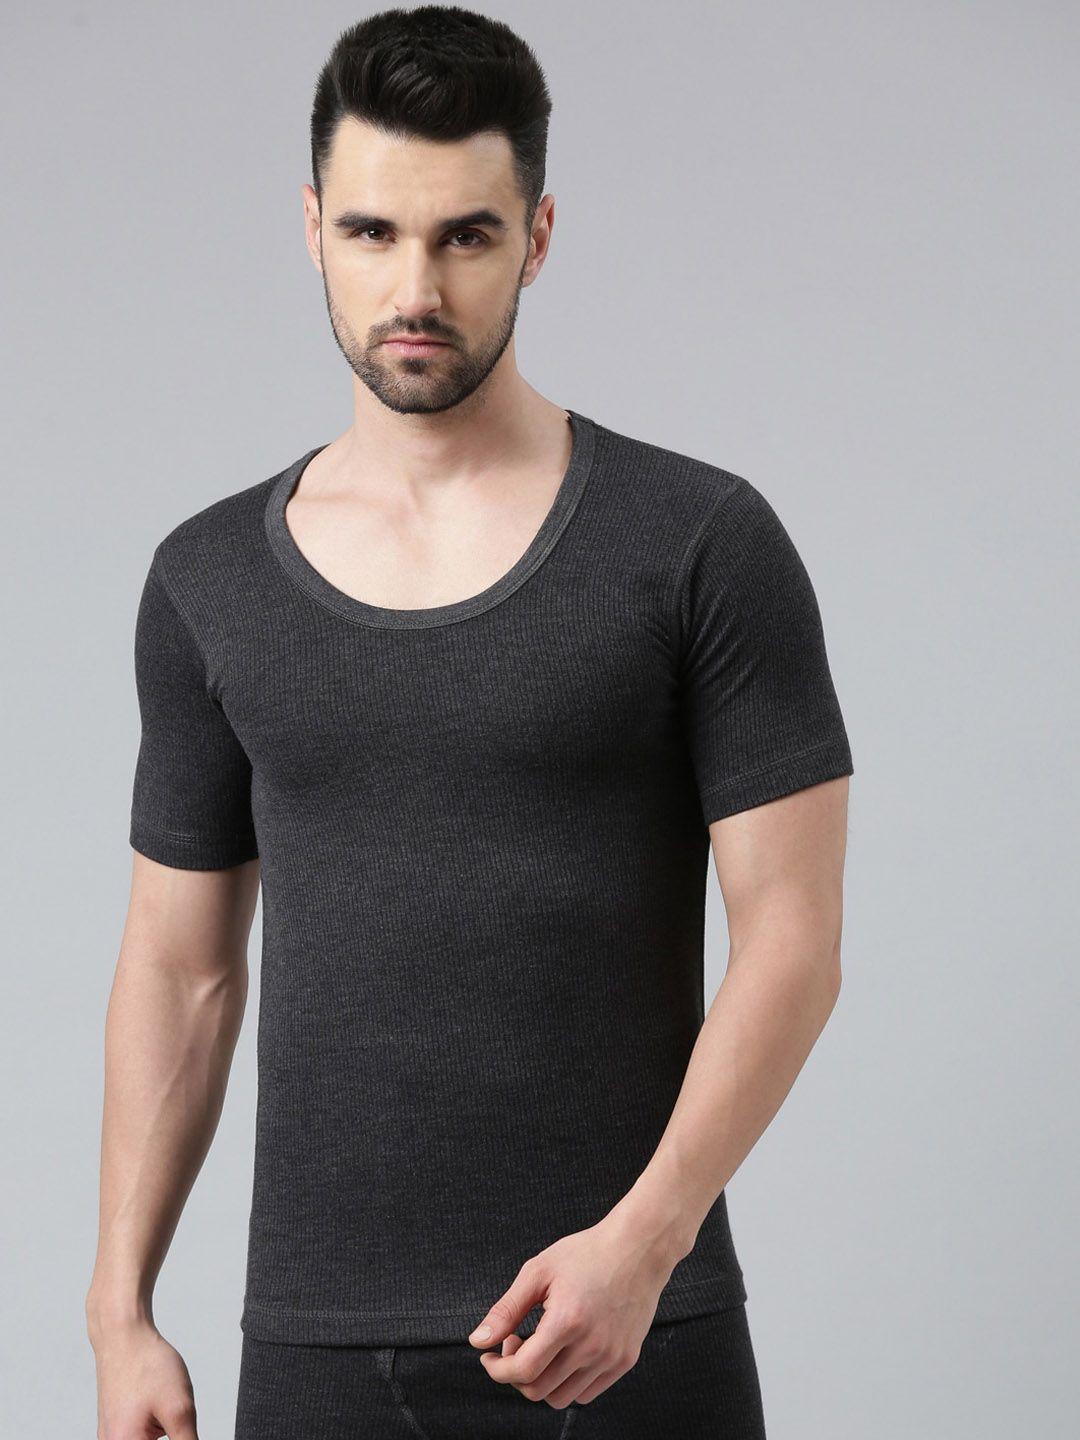 dixcy scott maximus 4-way stretch ribbed thermal tops